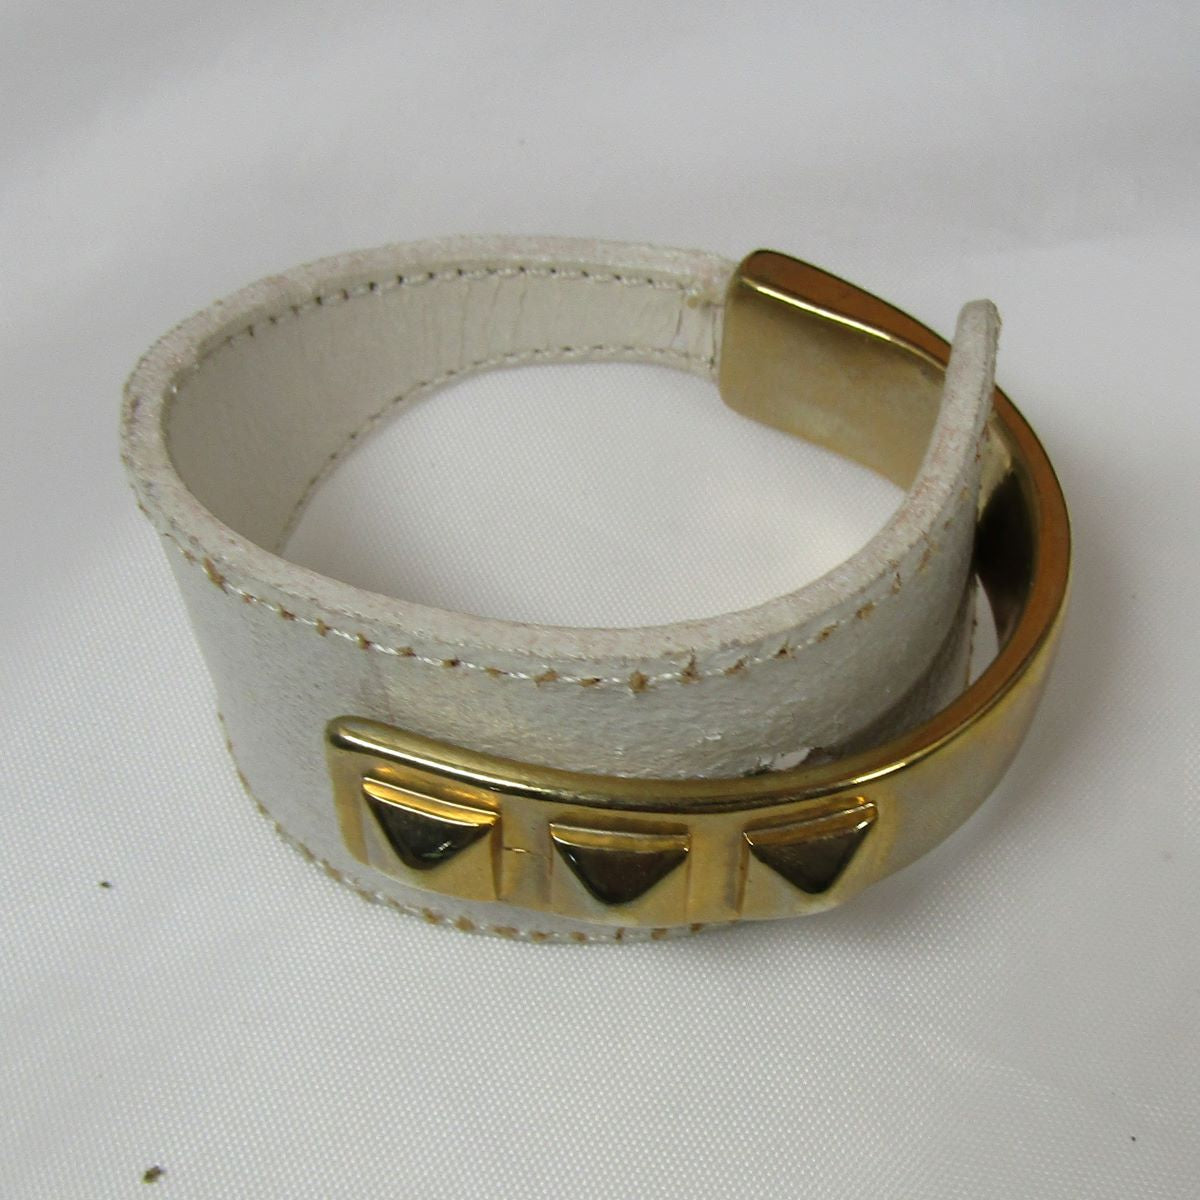 Cuff Leather Bracelet with Gold Accents - VP's Jewelry